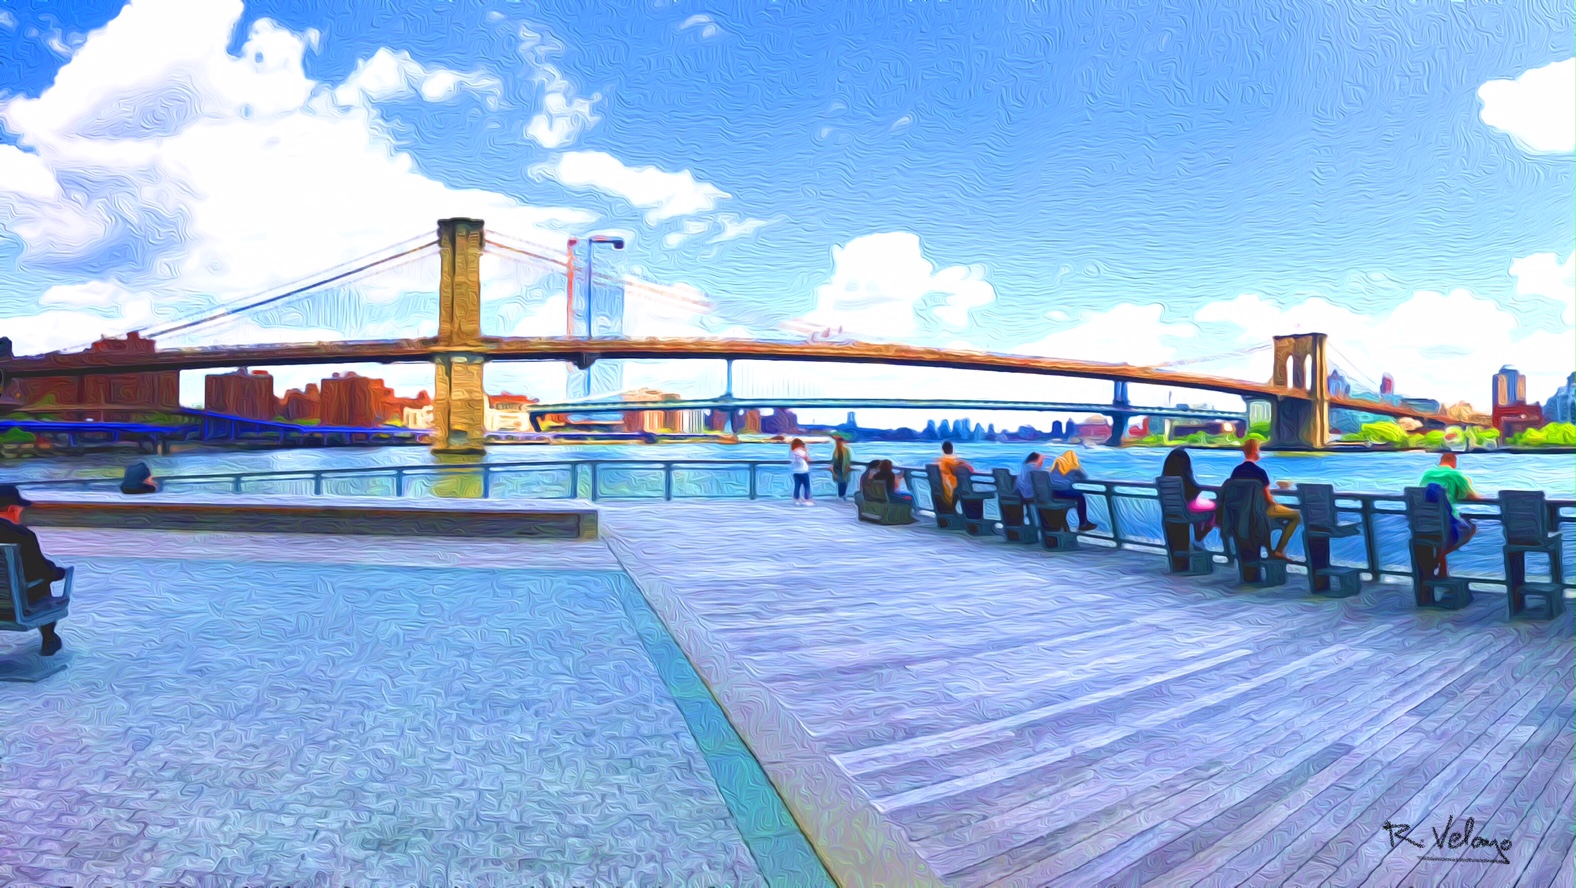 "VIEW OF BROOKLYN BRIDGE FROM THE SEAPORT" [Created: 1/13/2021]